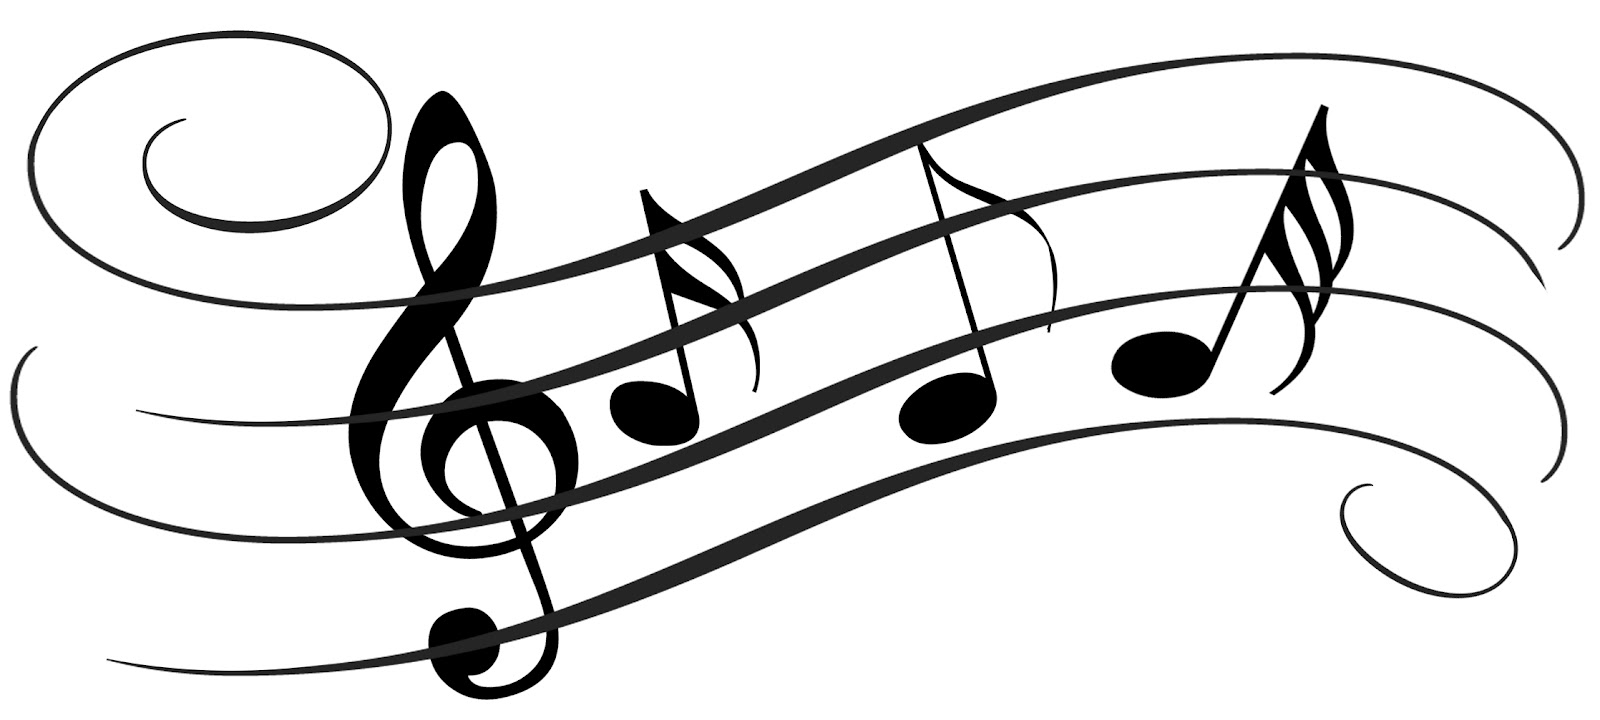 Images For > I Love Music Notes Drawings